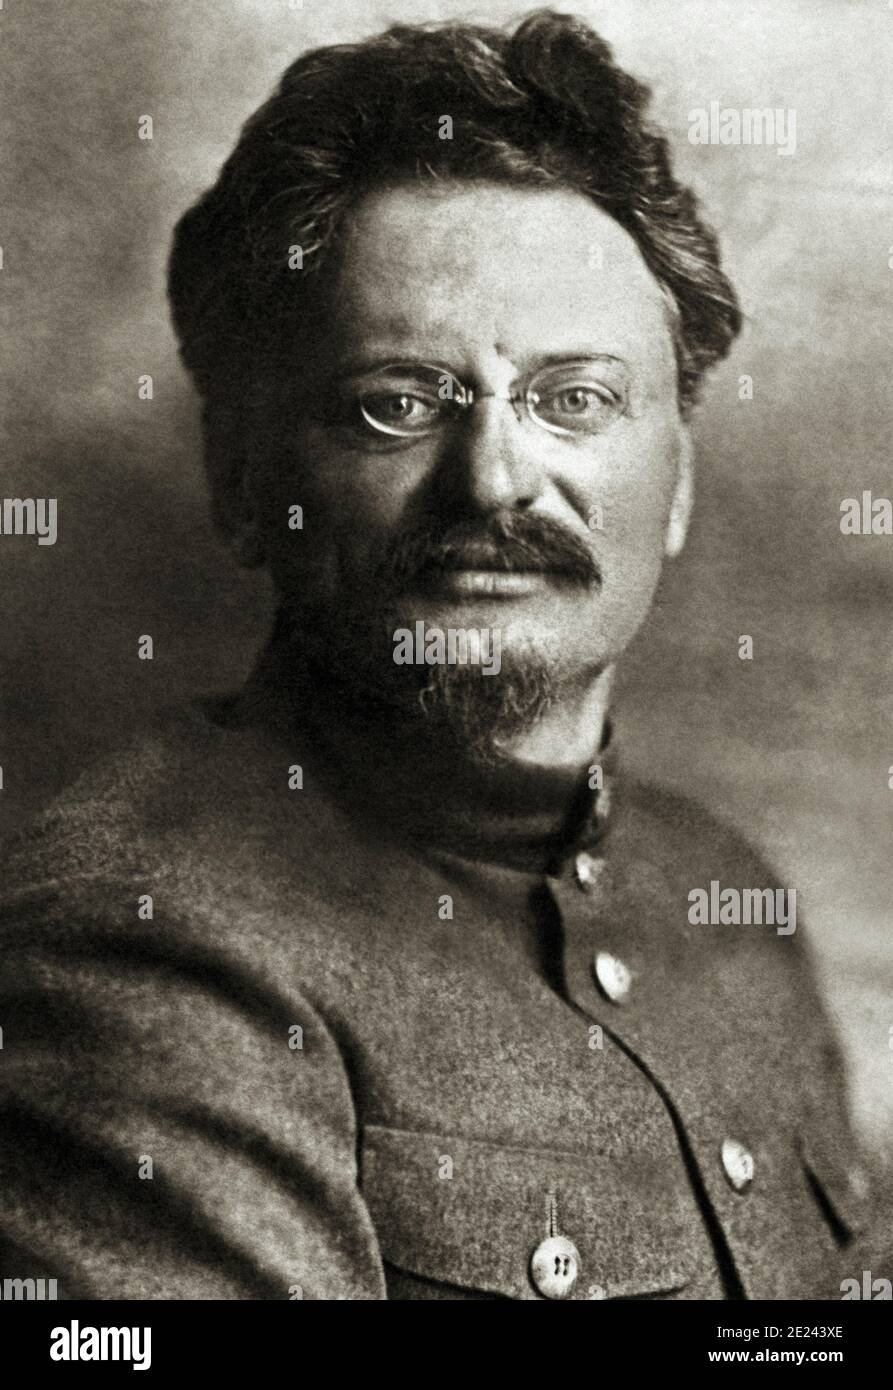 Leon Trotsky[a] (Lev Davidovich Bronstein; 1879 – 1940) was a Soviet revolutionary, Marxist theorist, and politician whose particular strain of Marxis Stock Photo